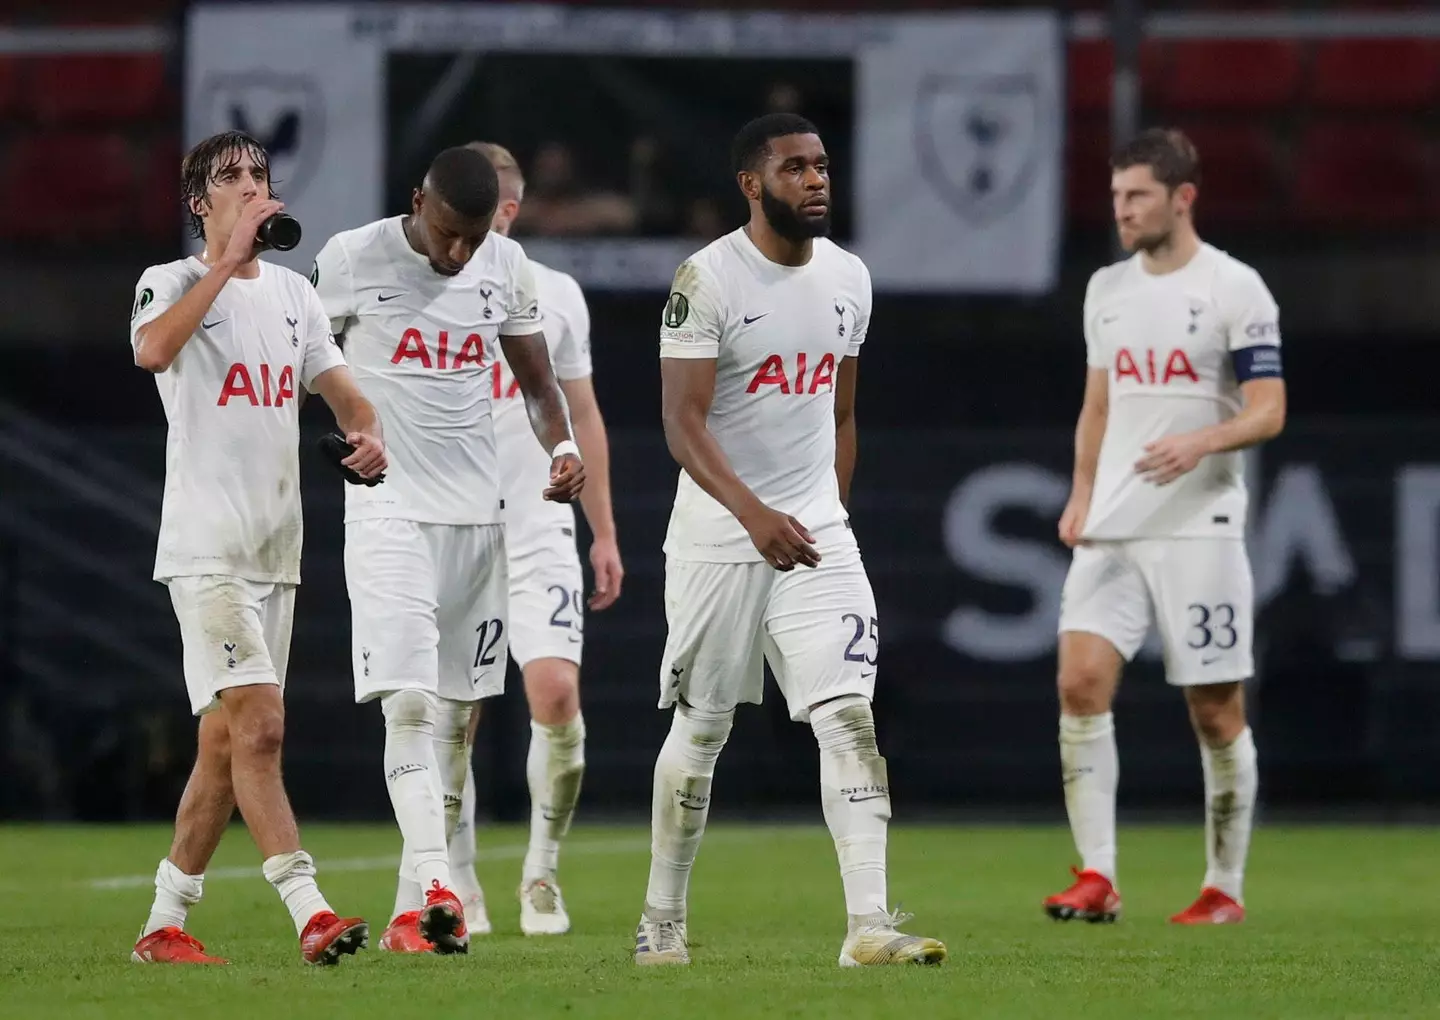 Spurs drew with Rennes earlier in the group. Image: PA Images